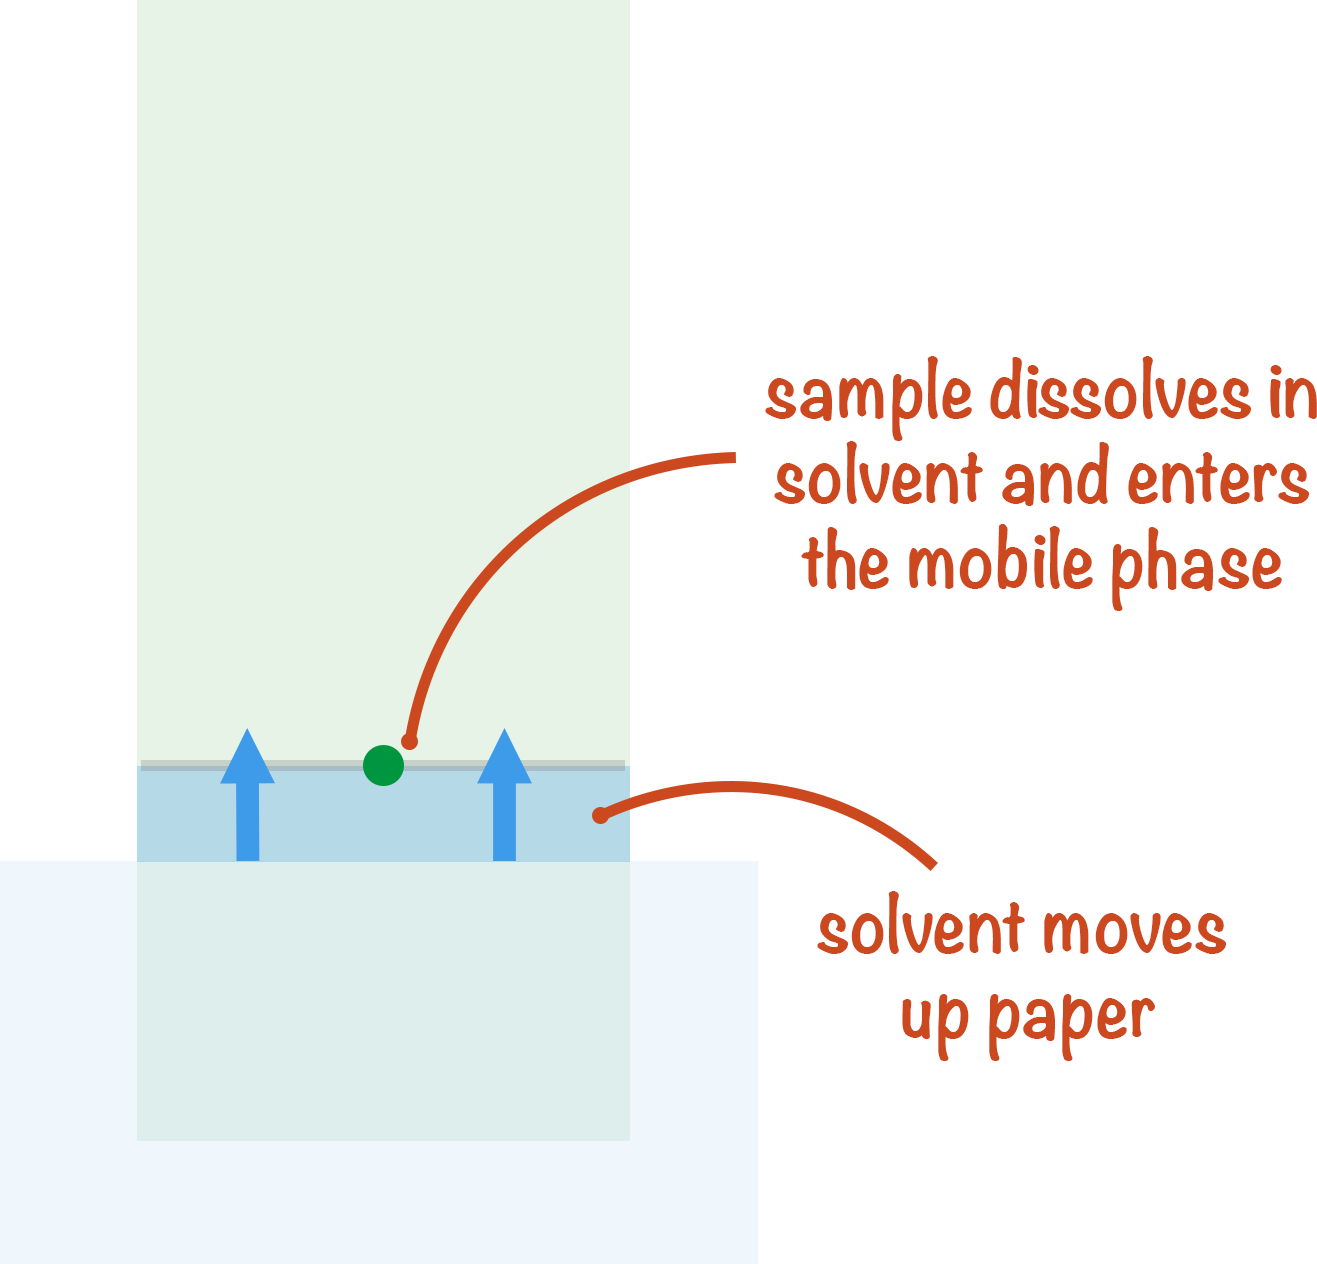 Paper chromatography capillary action solvent moving